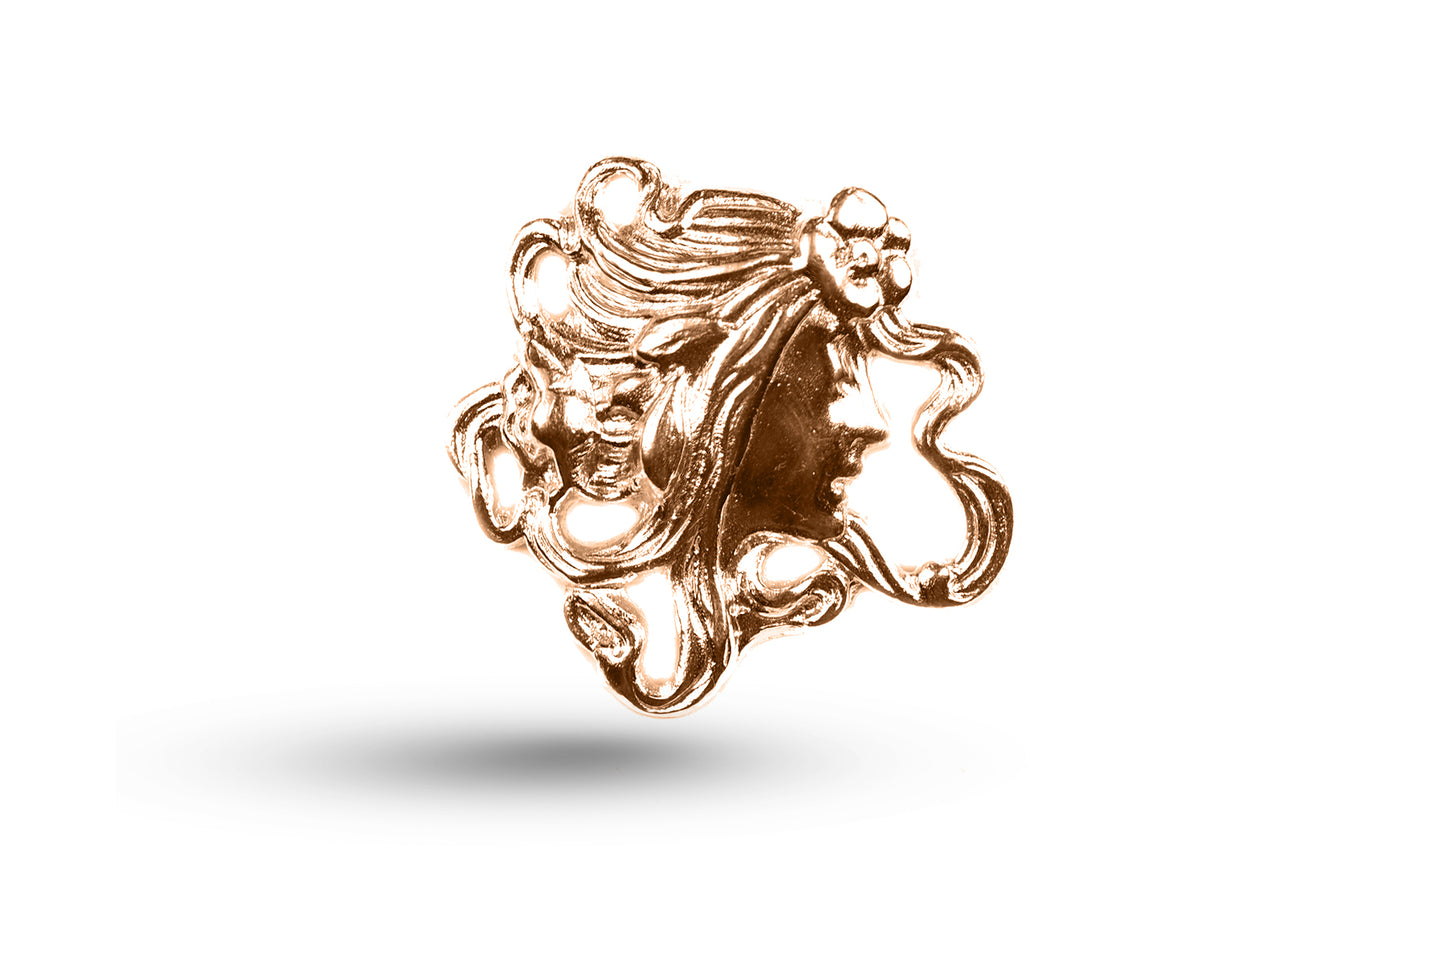 Luxury rose gold Art Nouveau long haired lady charm.